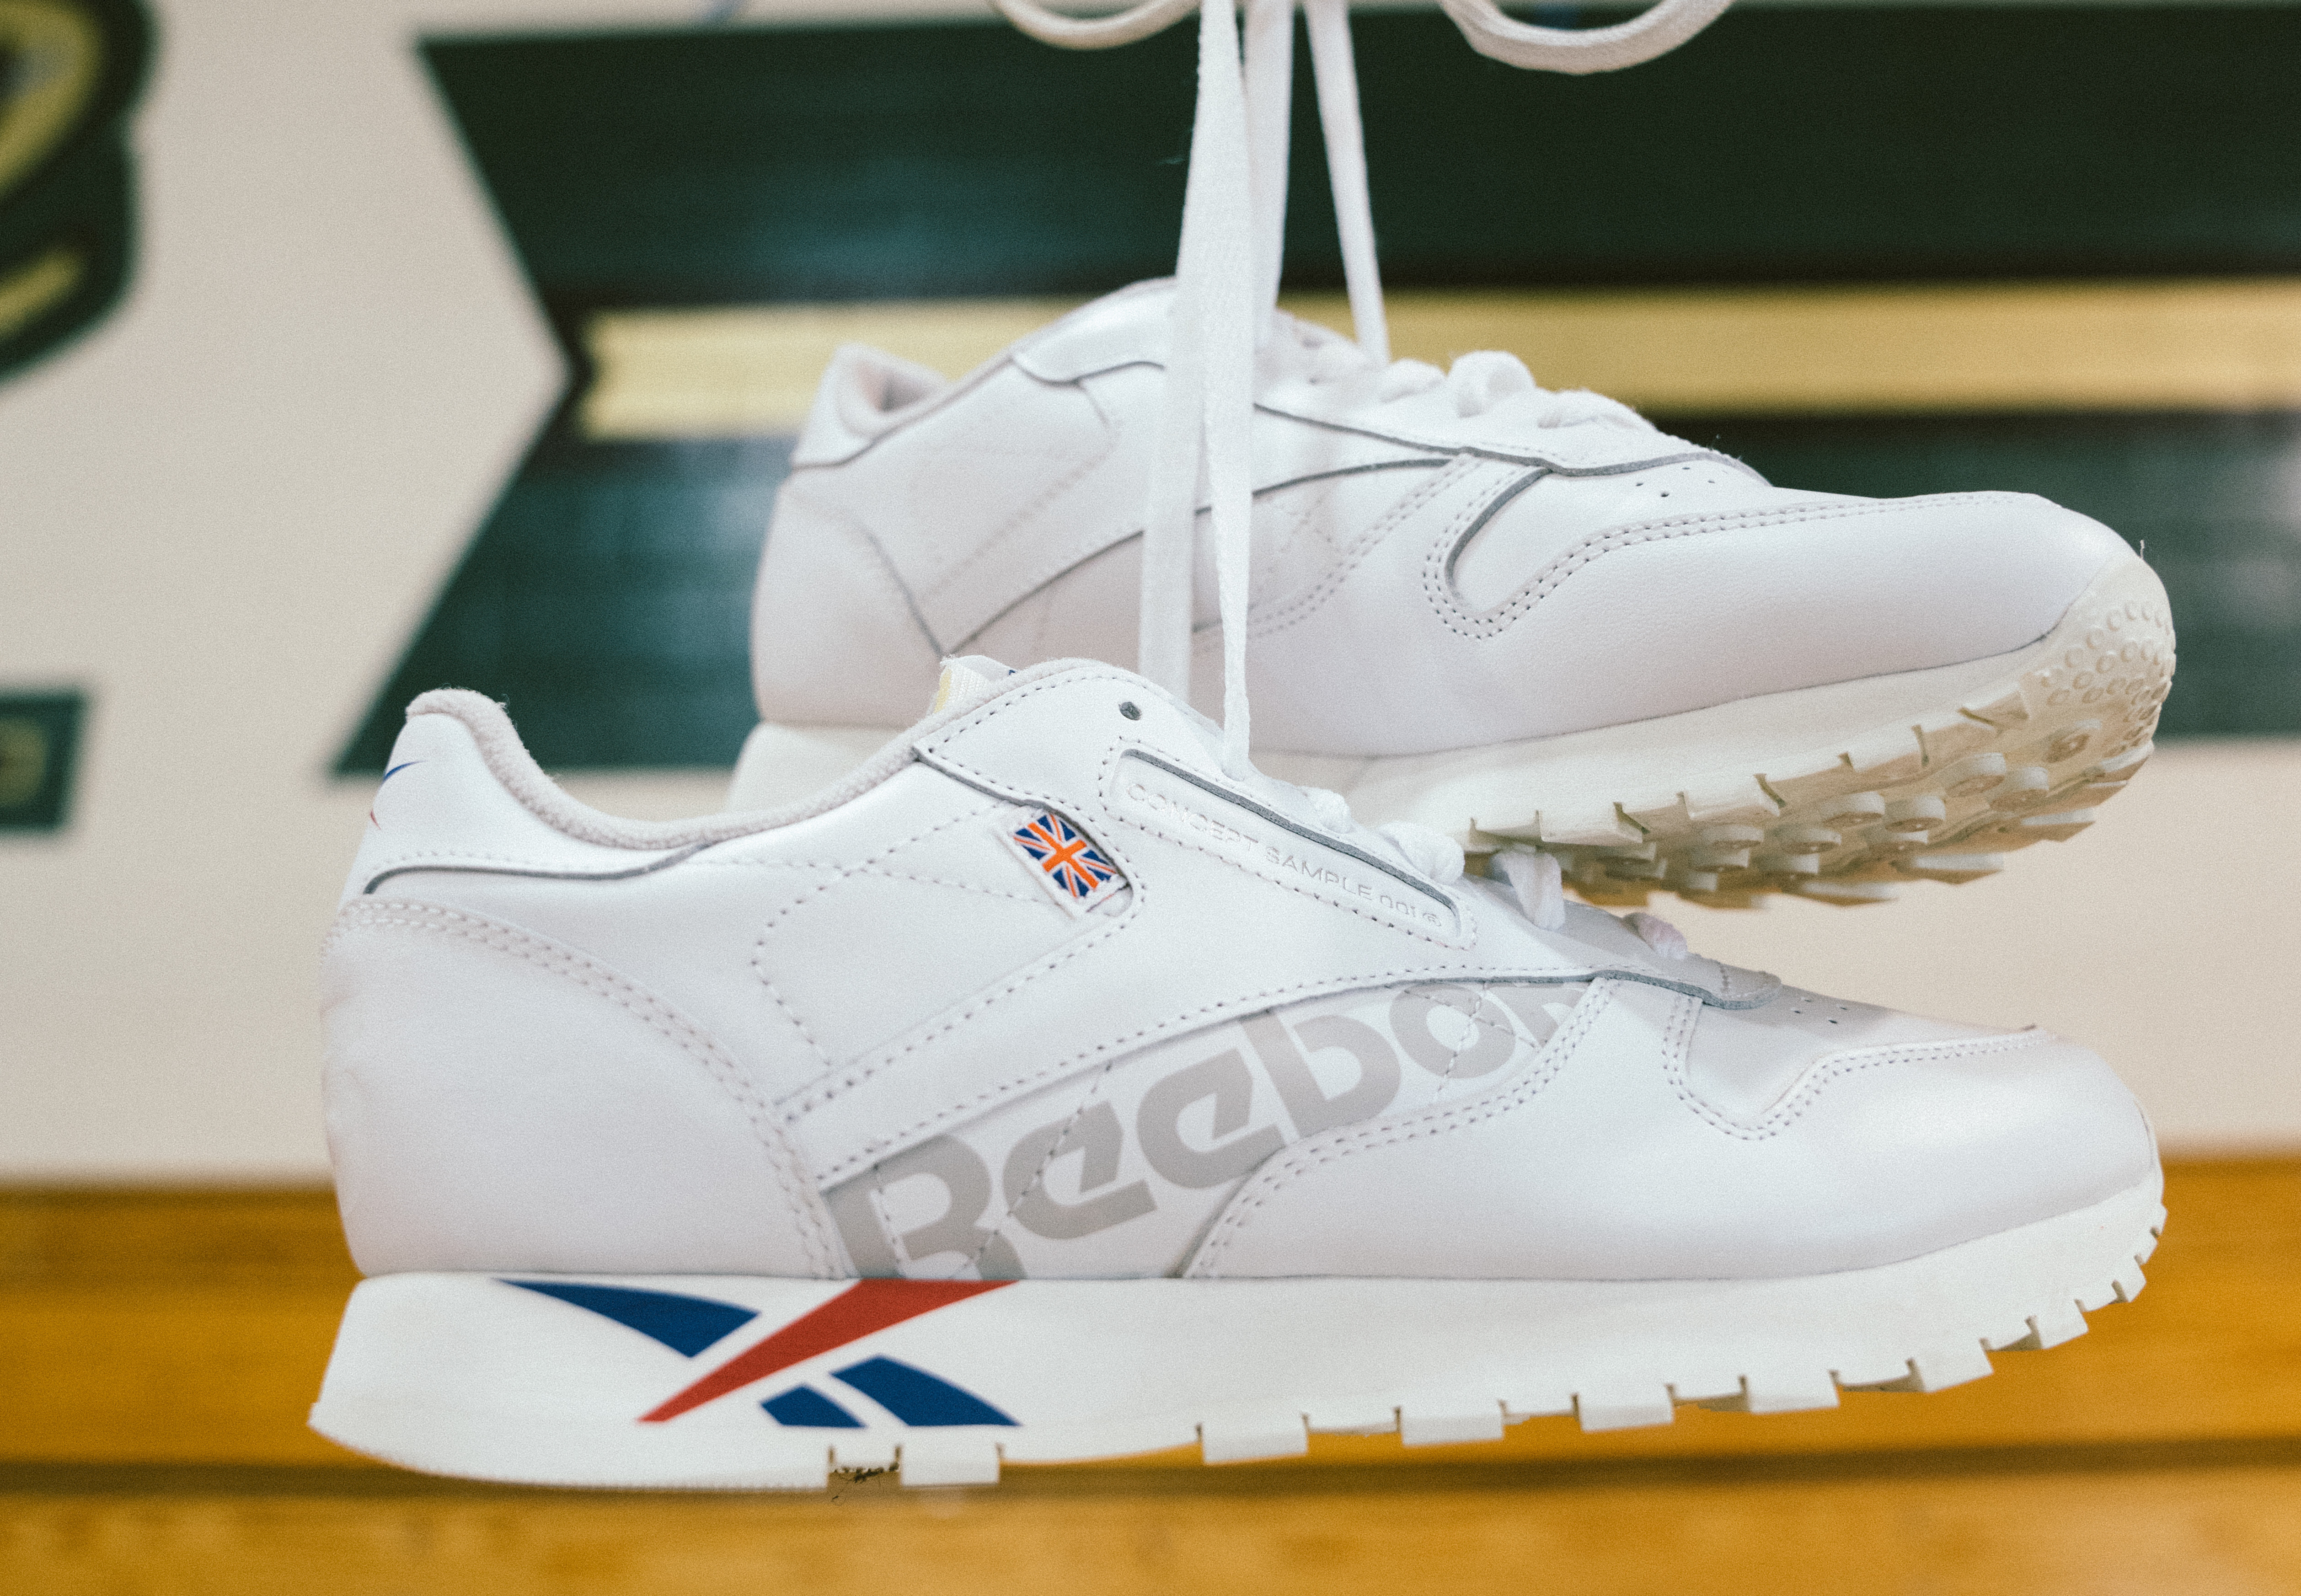 Abundantemente General Conclusión Reebok Calls on Rappers to Launch Reworked Silhouettes | Complex